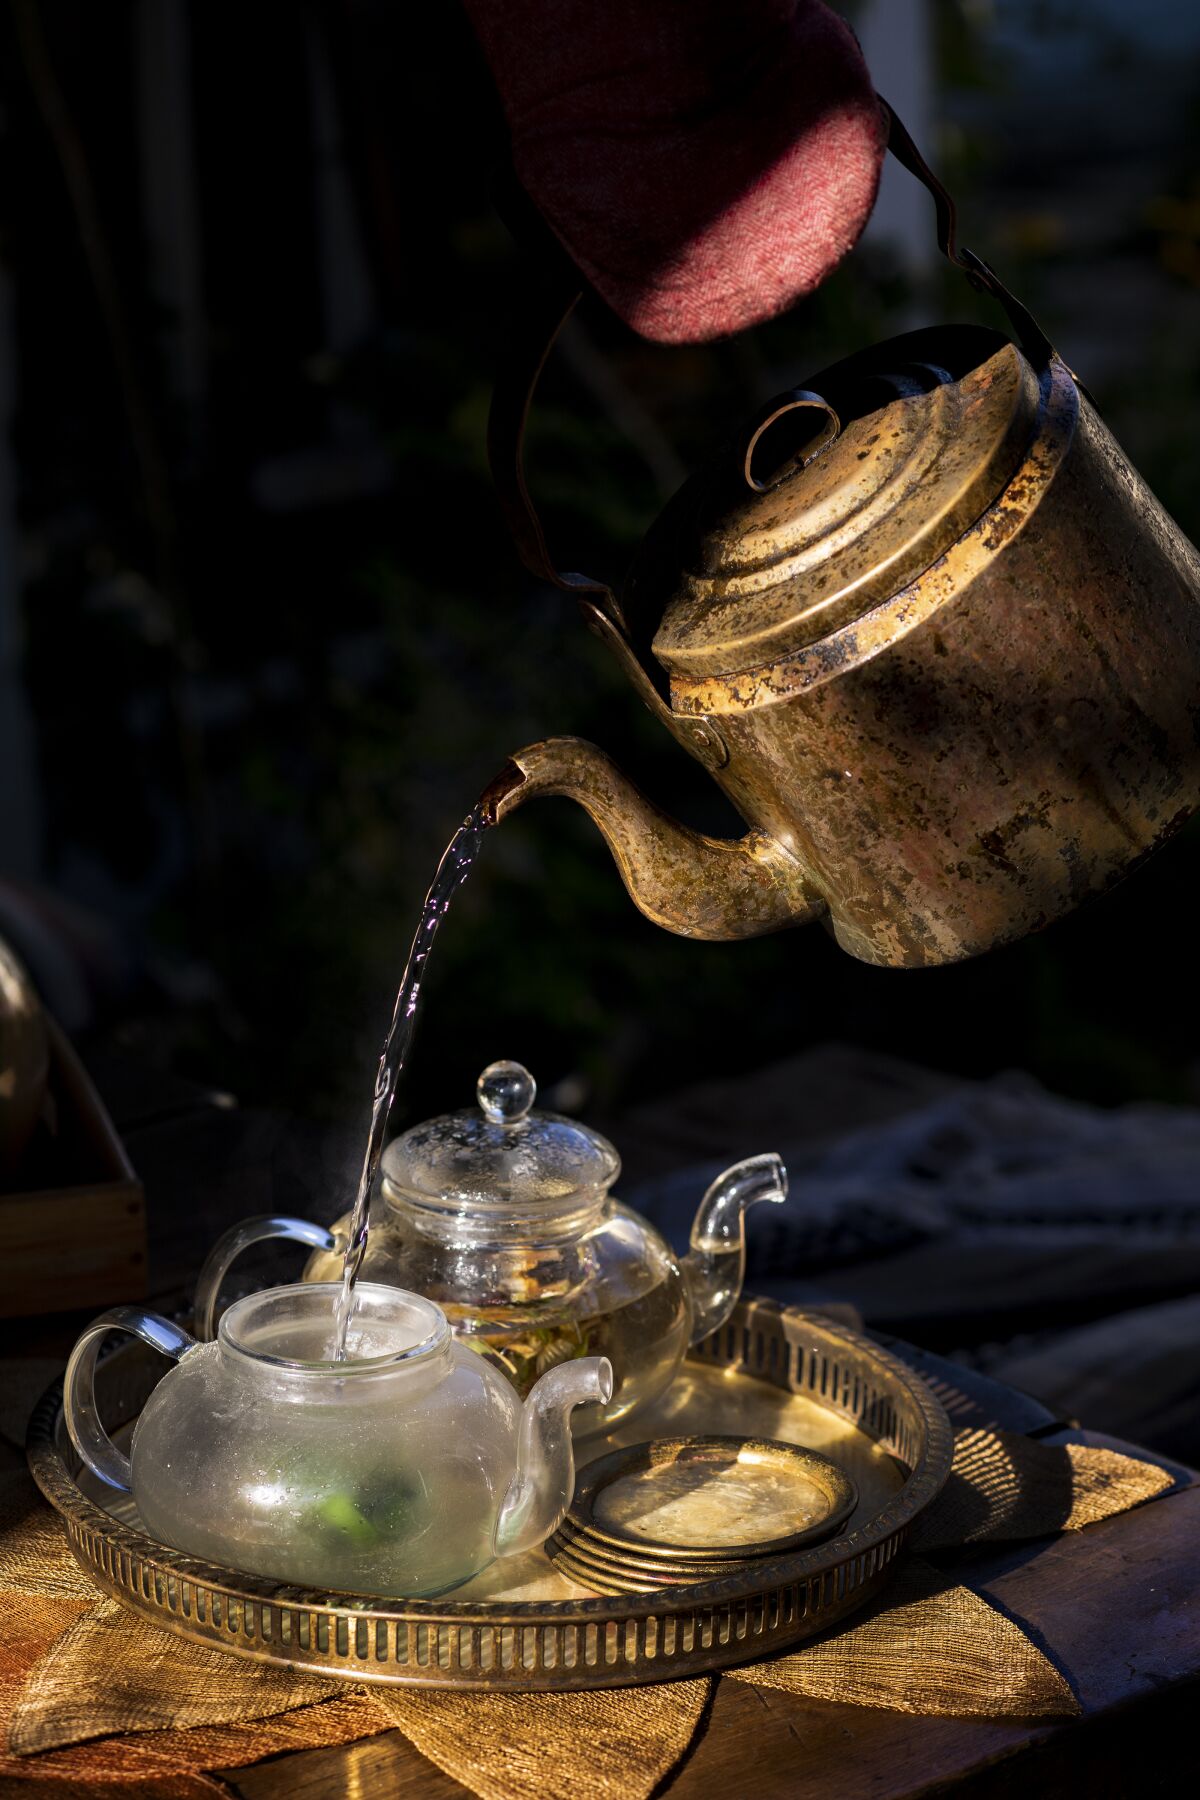 Hot water is poured into a glass teapot filled with herbs on a metal tray.